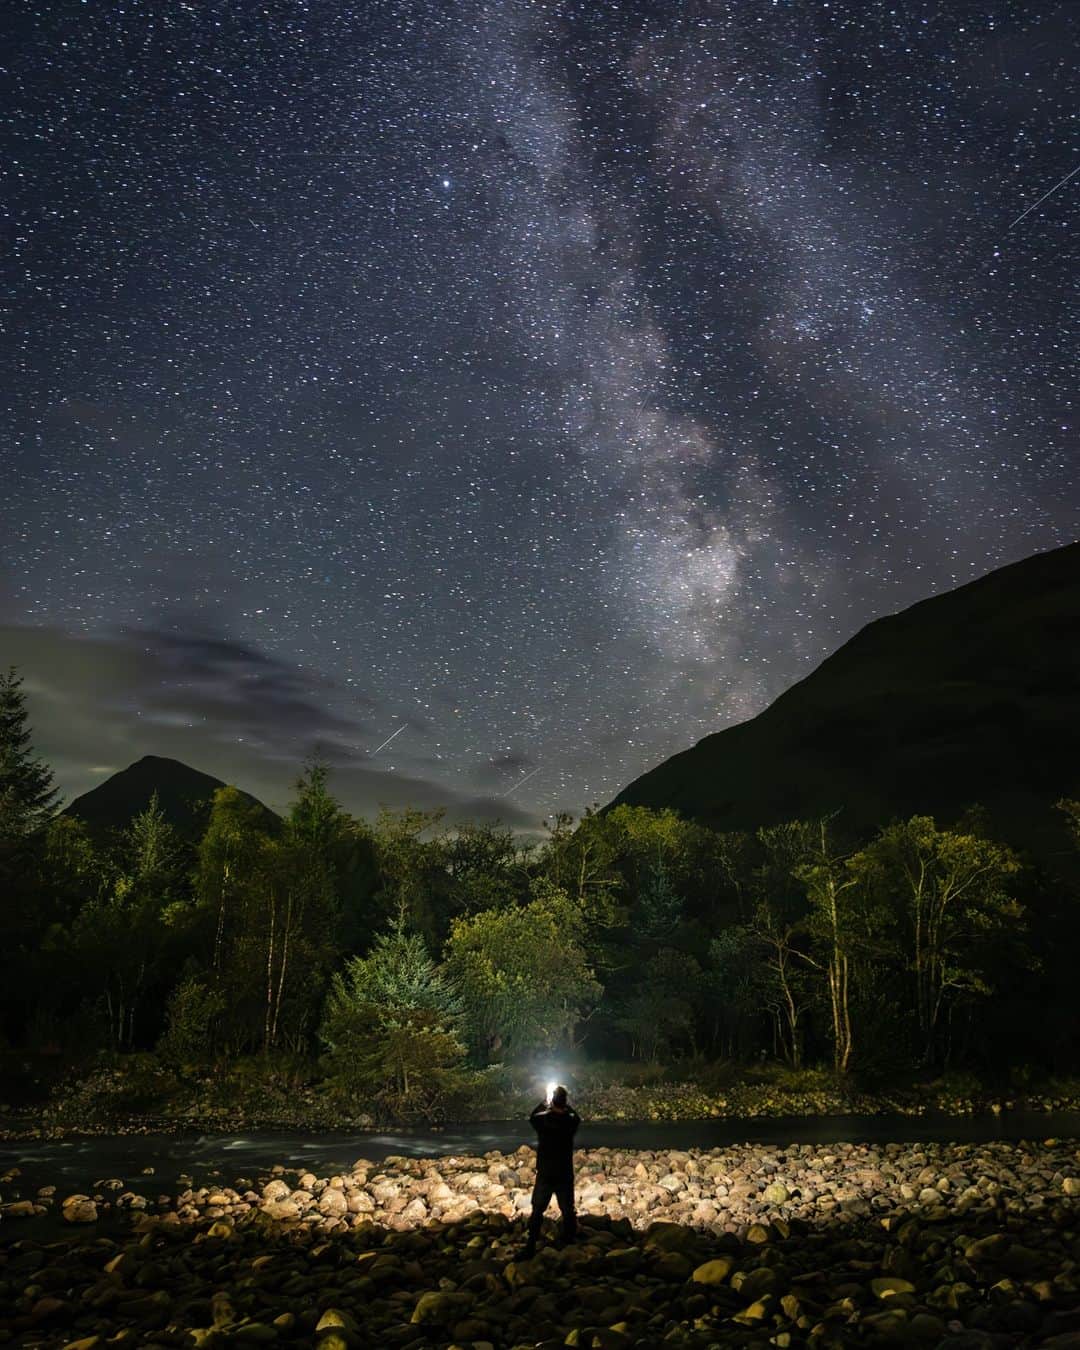 Canon UKのインスタグラム：「Have you ever wondered what goes on behind the lens? 📸🌠  If so, here’s the story of how @fabsinthe captured this stunning shot:  “Whilst on a trail mountain race weekend in Scotland with some friends, we stayed at the red squirrel campsite in Glencoe. Alas there were no red squirrels but we were treated to a completely clear, still and moonless night with the perfect view of the Milky Way over the distant Munros. I set up a tripod, dialled in the settings and then ran into the shot and shone my phone torch upward to try and highlight how small I felt compared to the vastness of what was in my line of sight.”  #canonuk #mycanon #canon_photography」